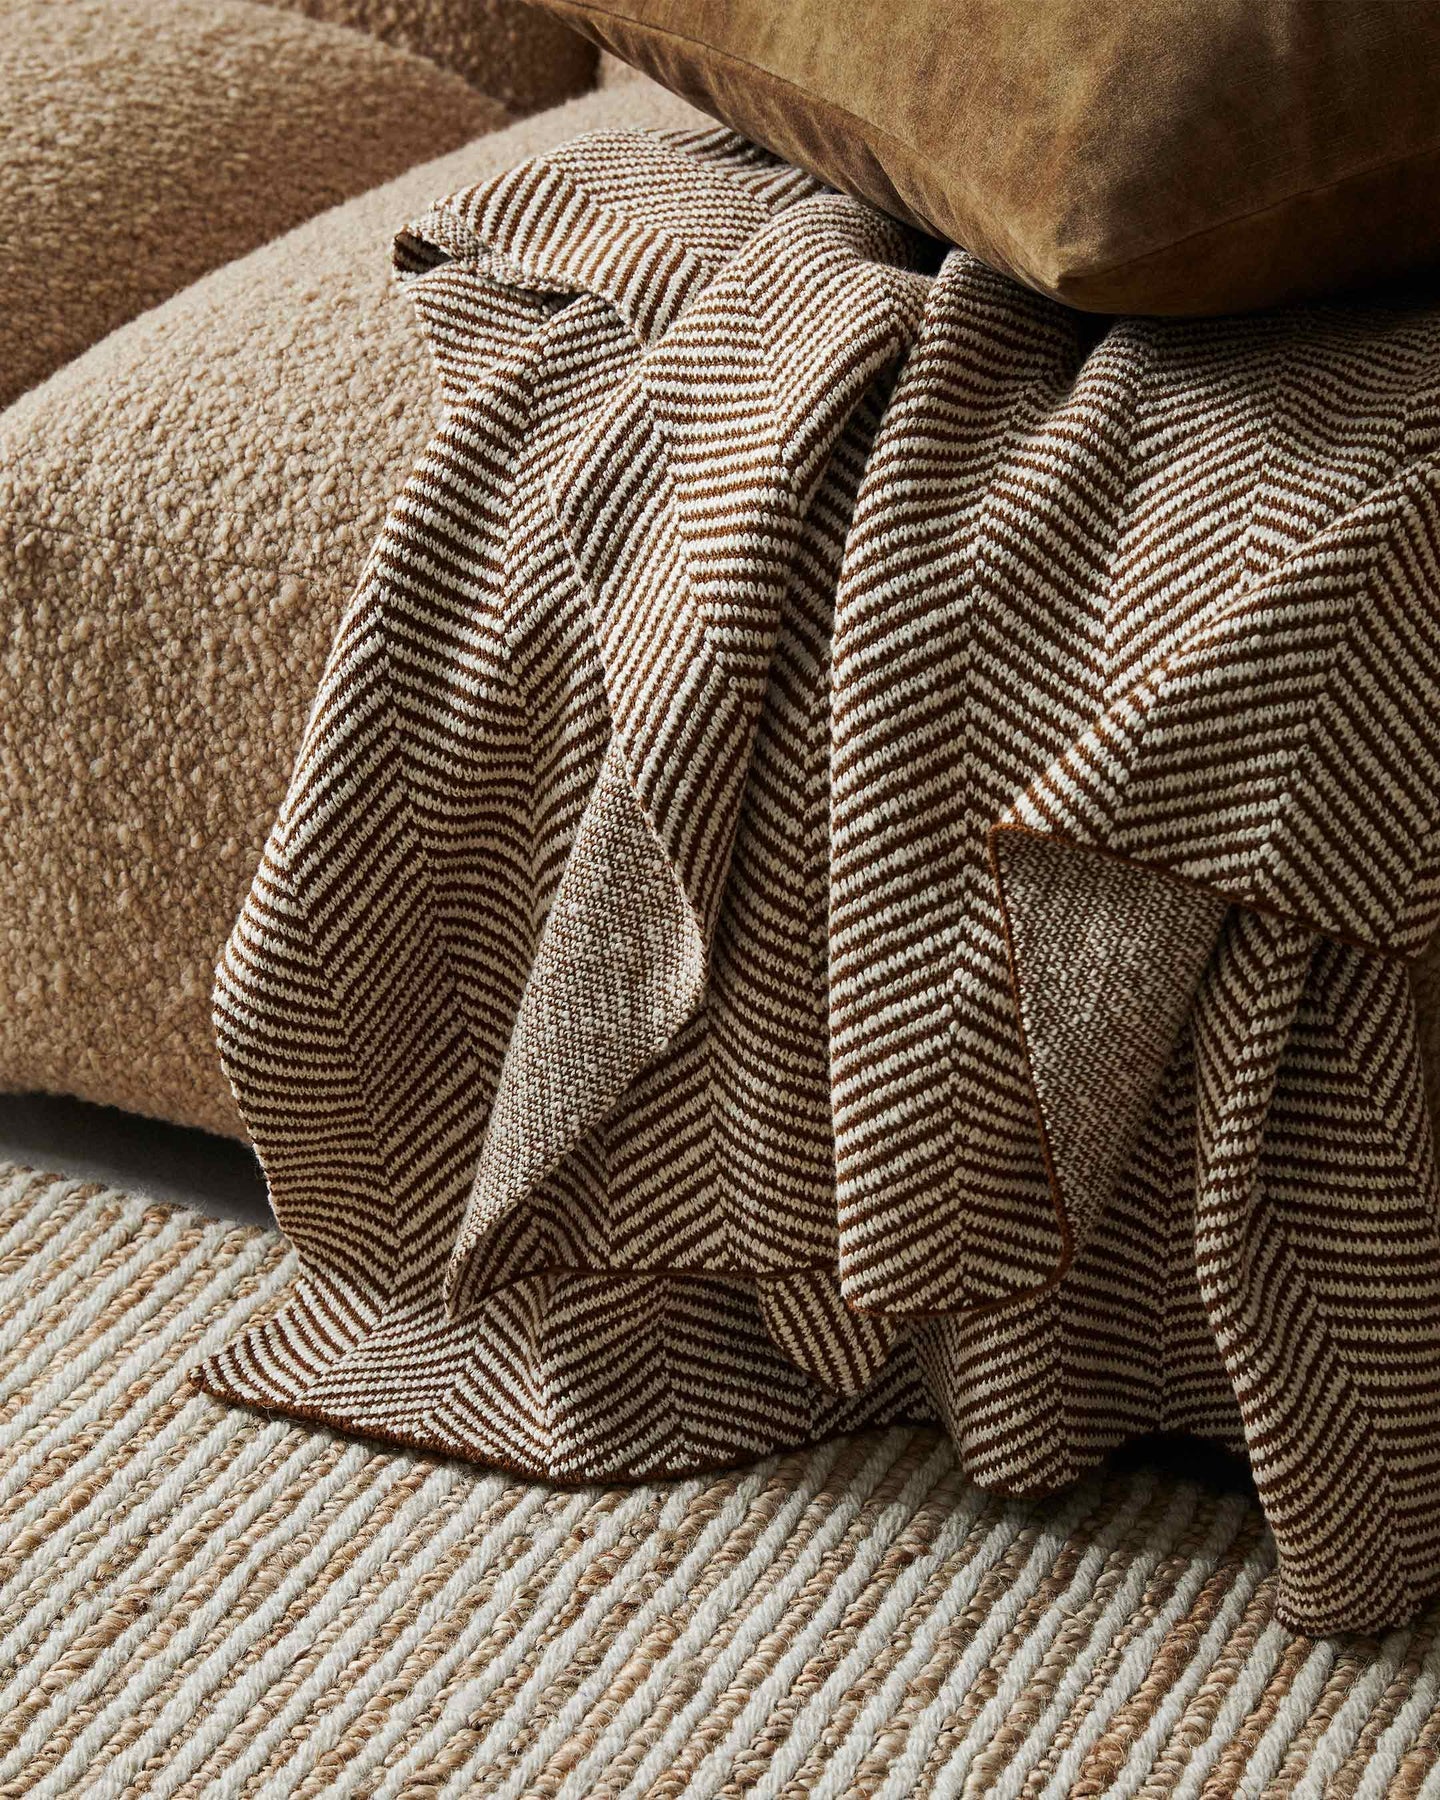 Made from 100% cotton, Solano is a beautifully soft, herringbone throw with a bouclé reverse for a sophisticated style.